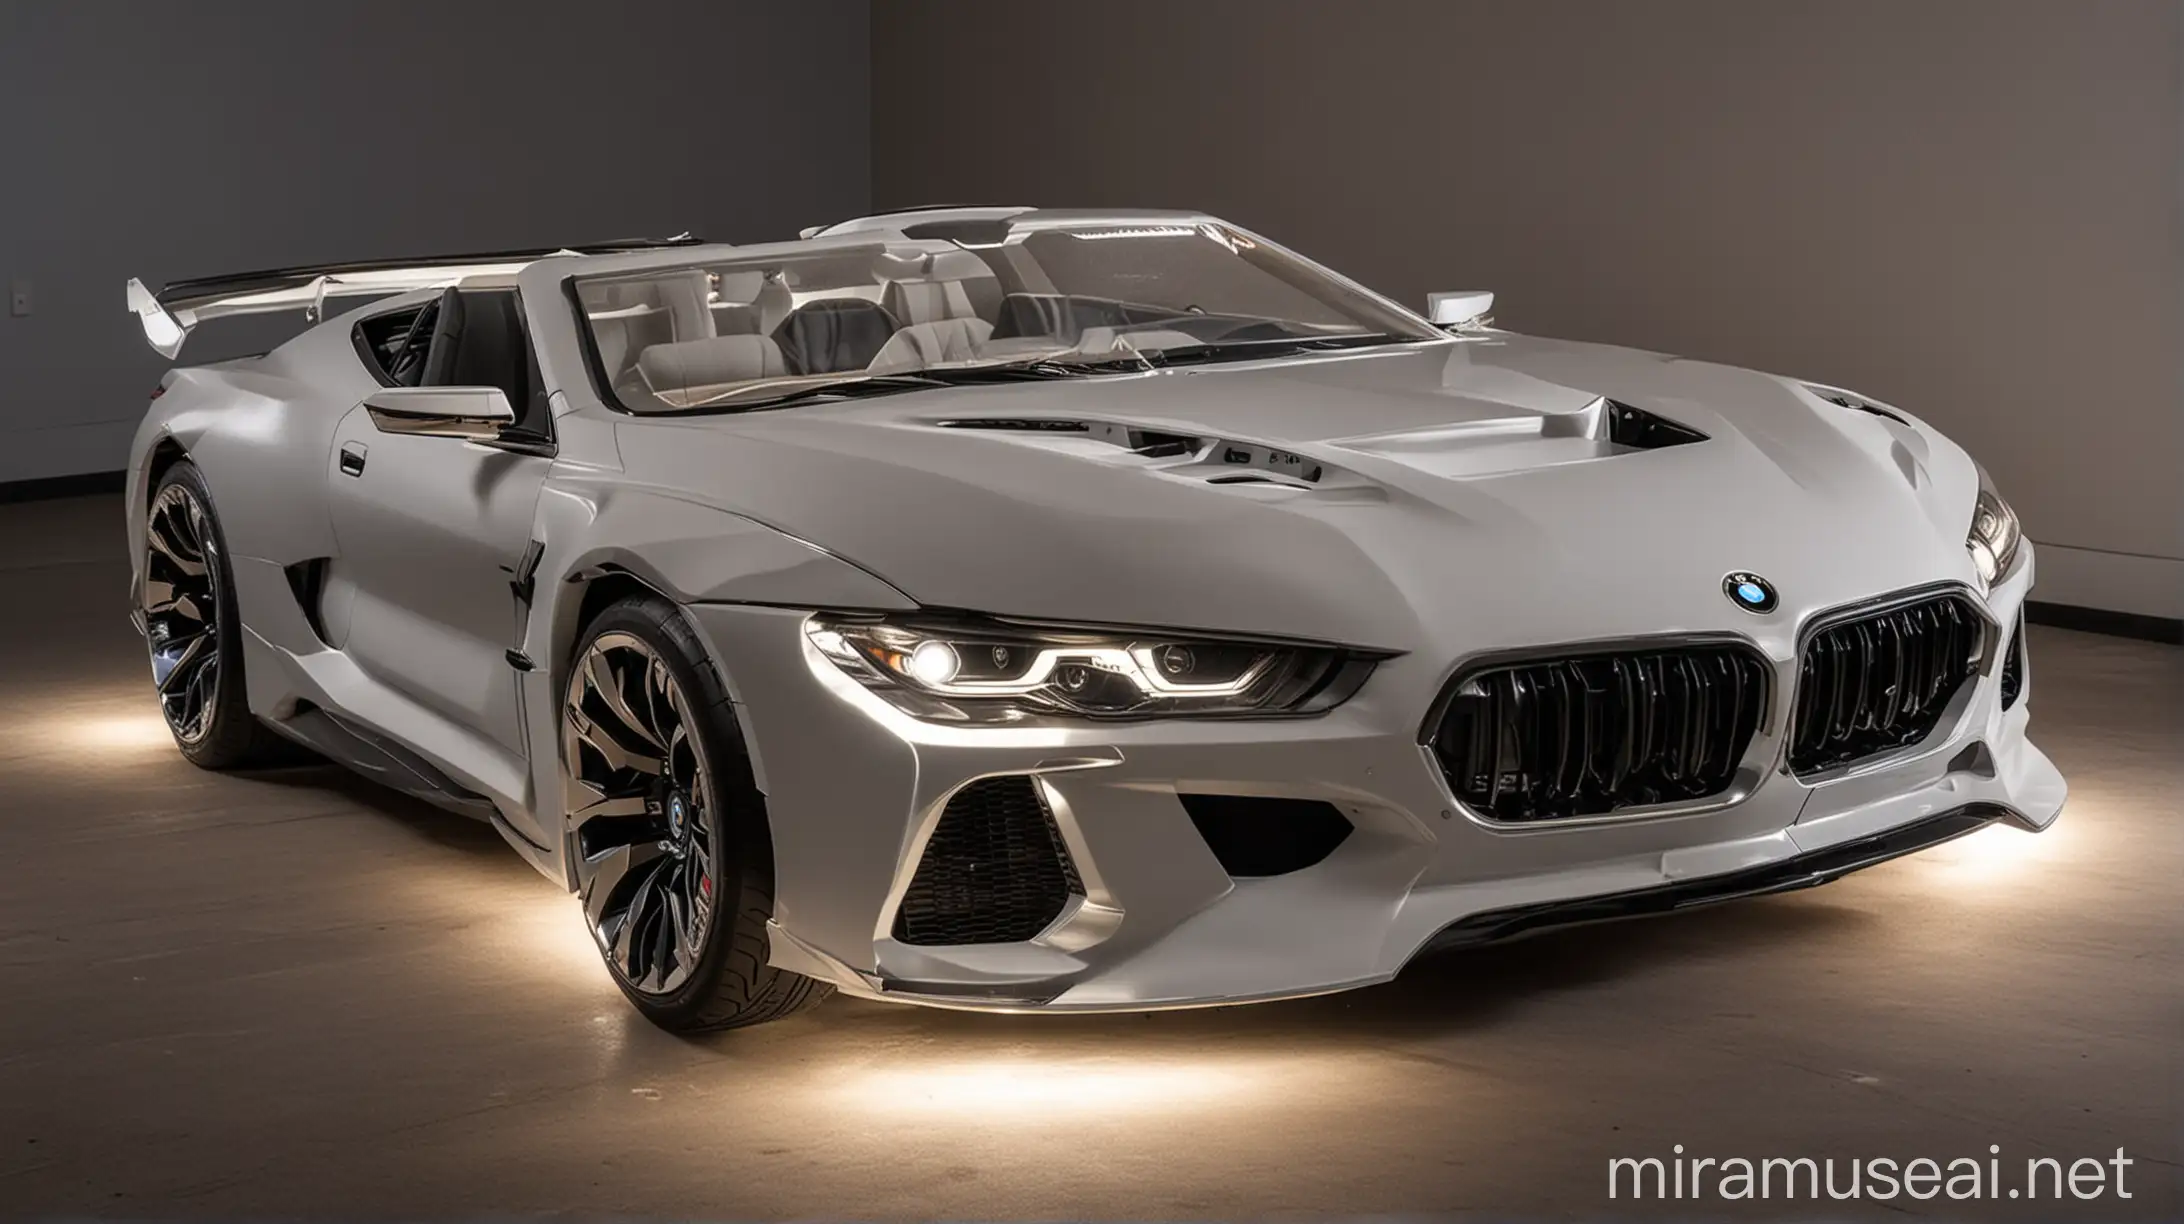 Luxurious BMW M8 Double Bed with Illuminated Headlights